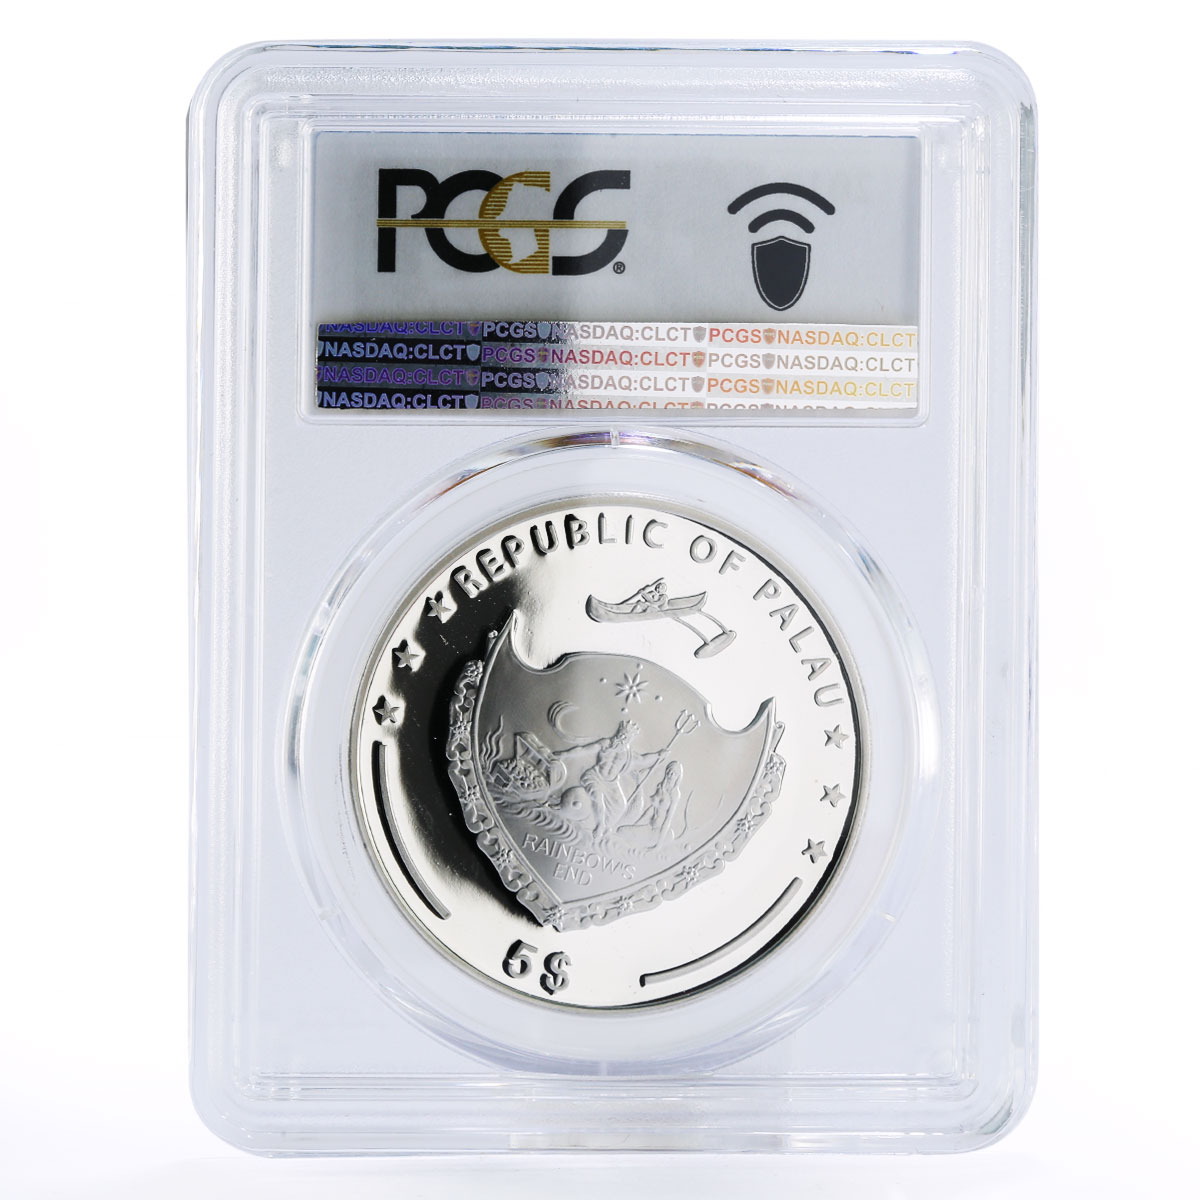 Palau 5 dollars 200 Years to the Battle of Bussaco PR69 PCGS silver coin 2010